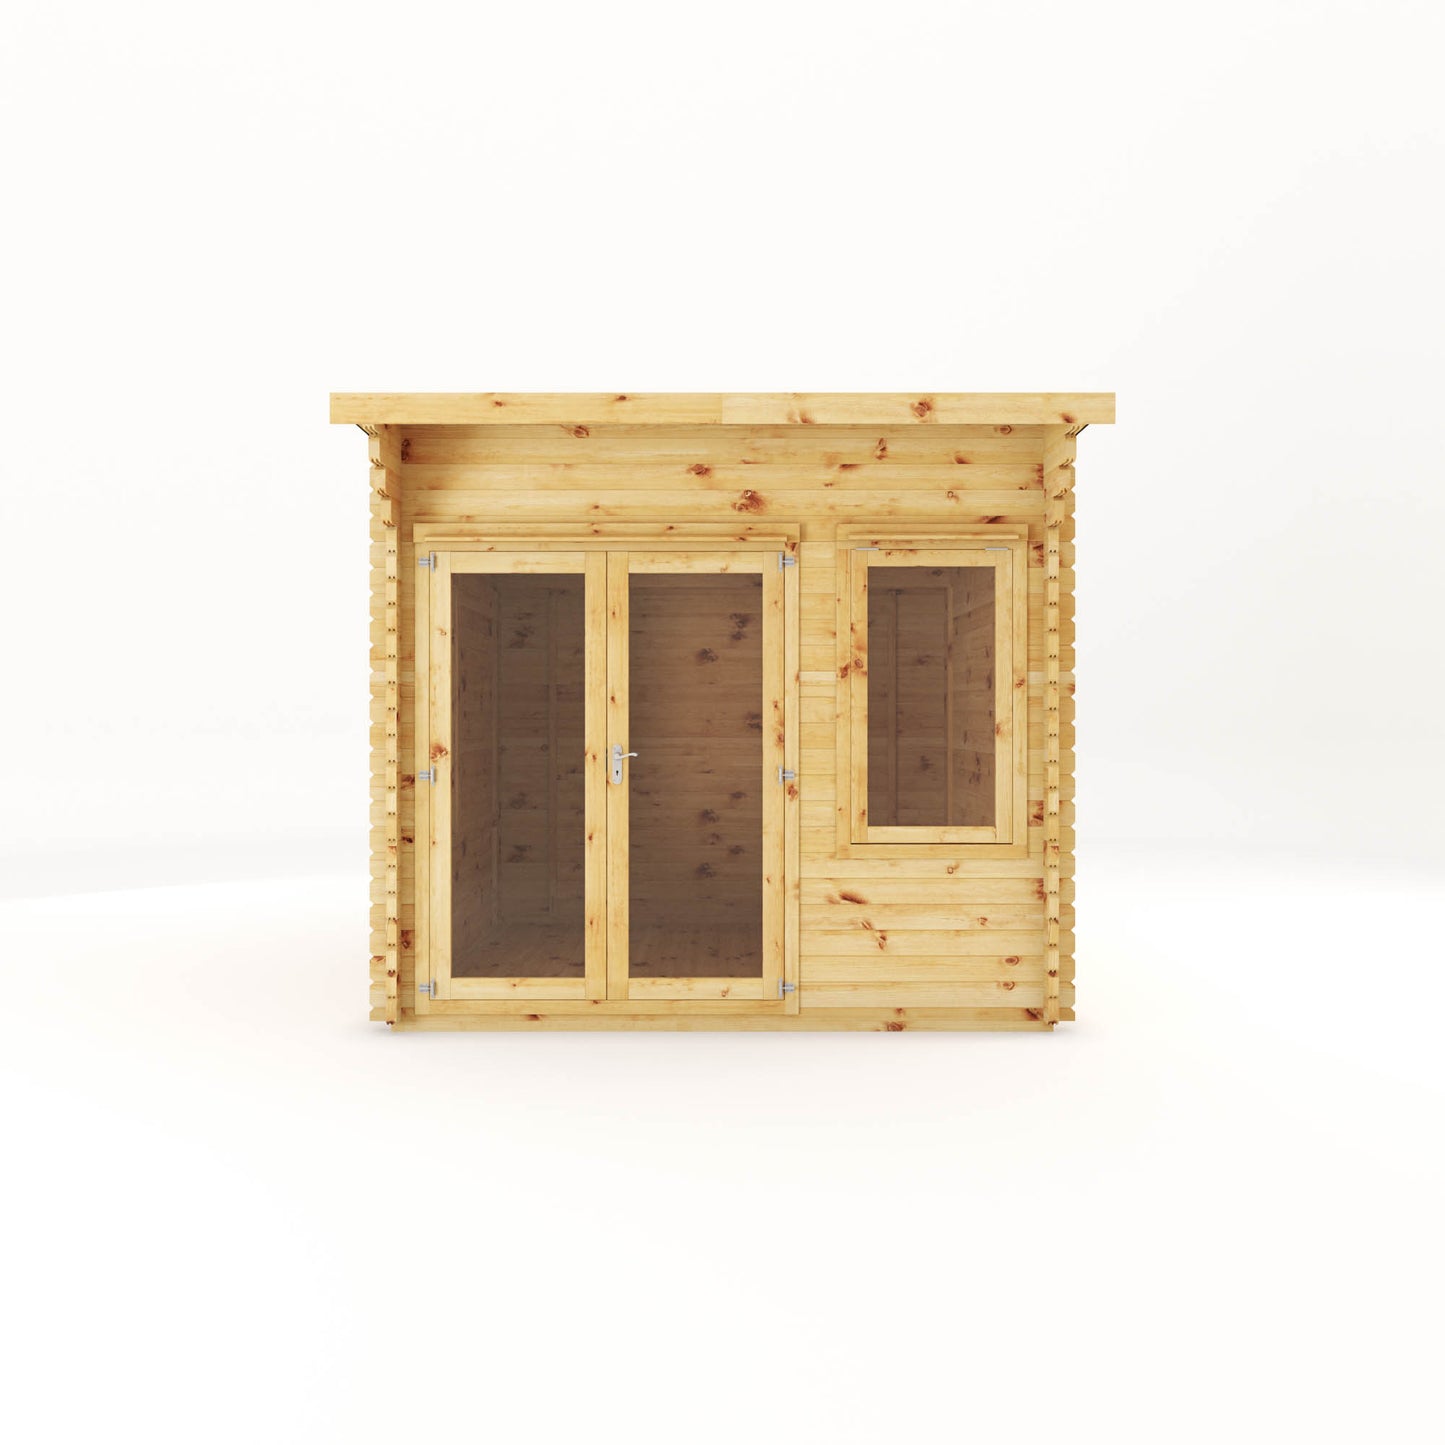 The 3m x 3m Tawny Curved Roof Log Cabin